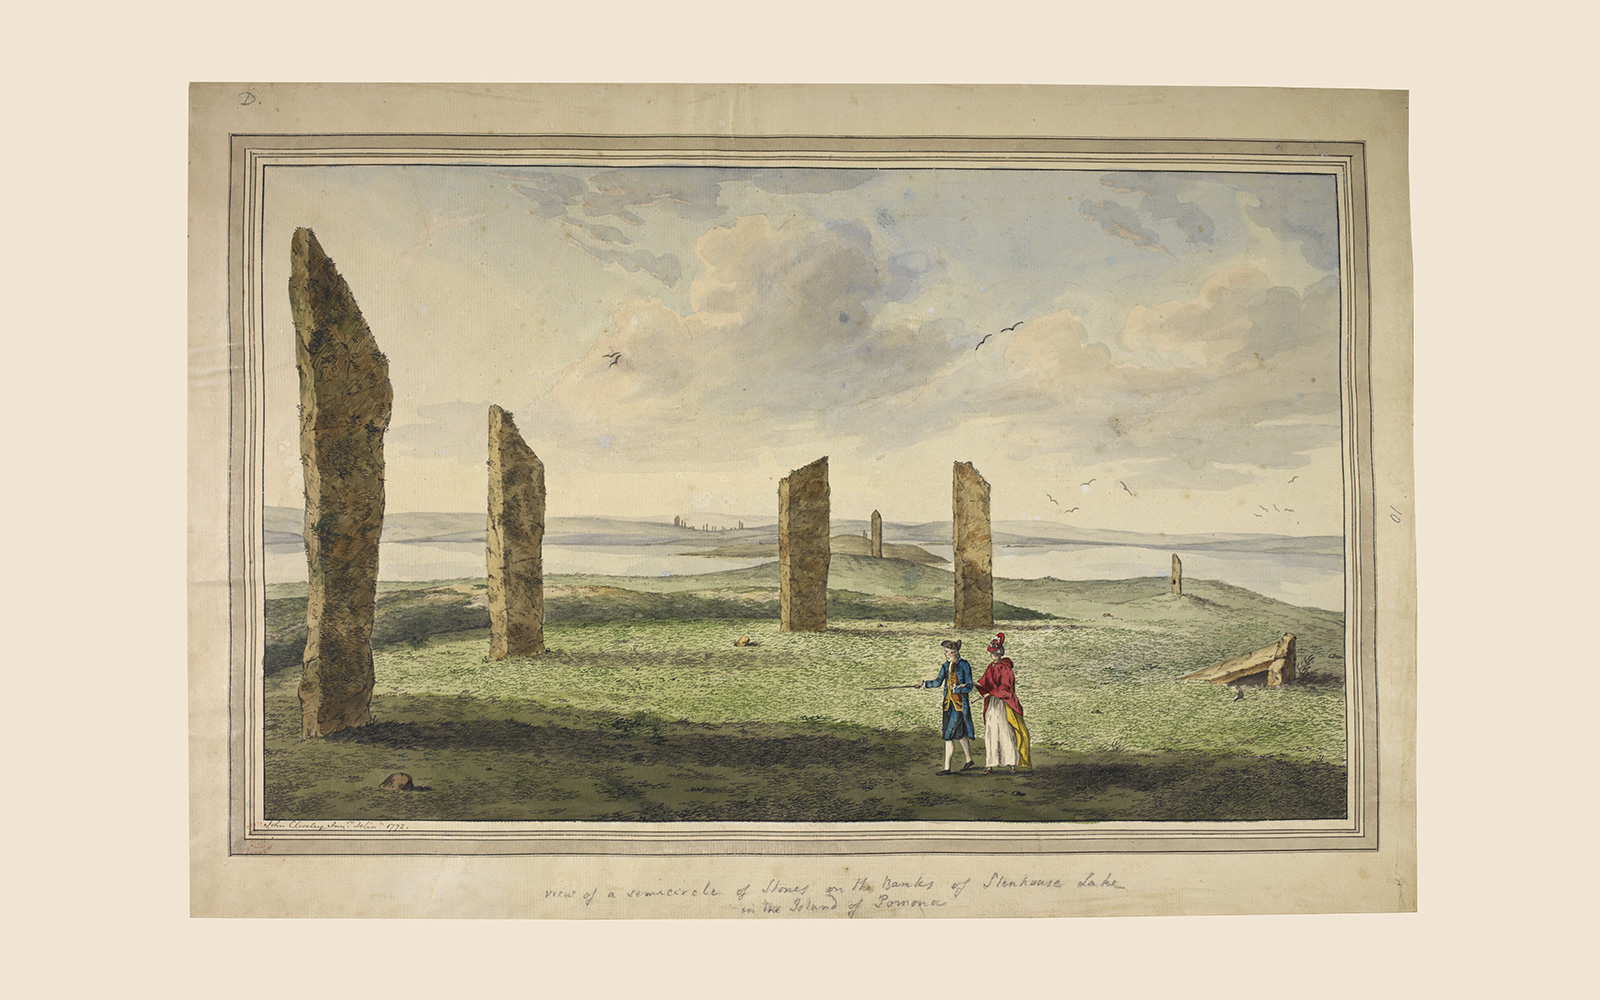 John Cleveley, 'View of a Semicircle of Stones on the Banks of Stenhouse Lake in the Island of Pomona' (British Library)